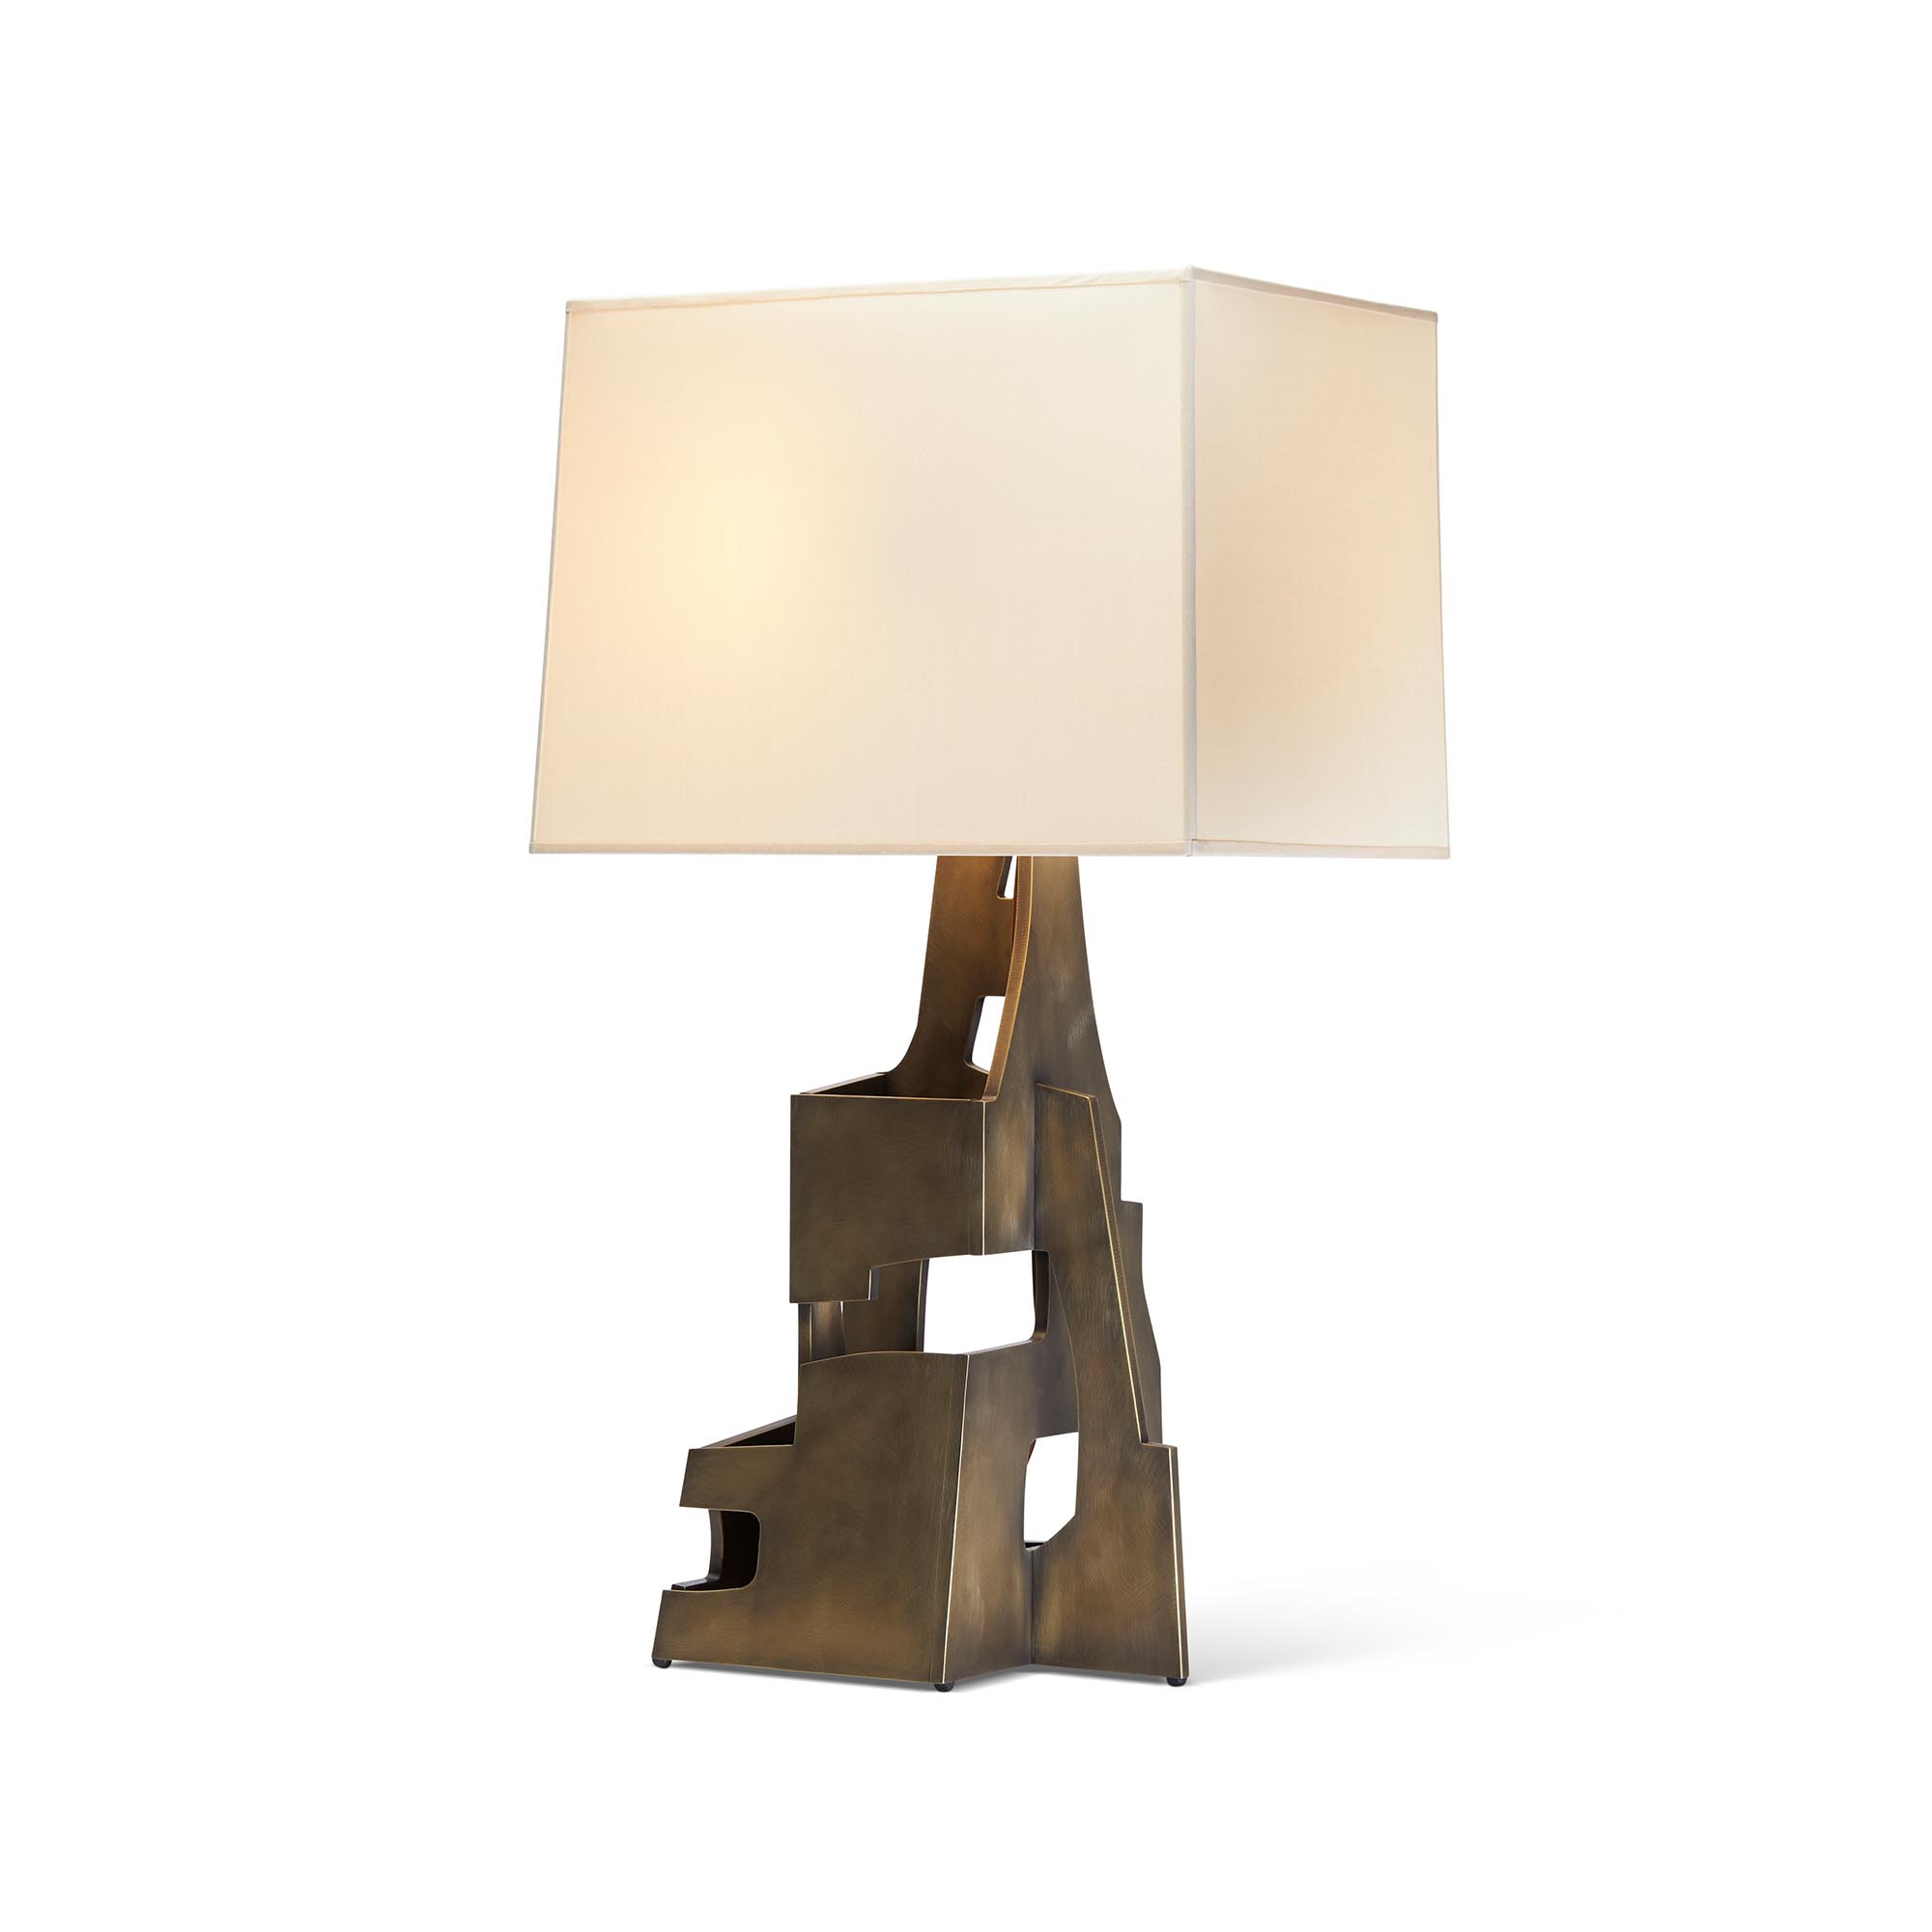 Tuell and Reynolds - Taos Table Lamp